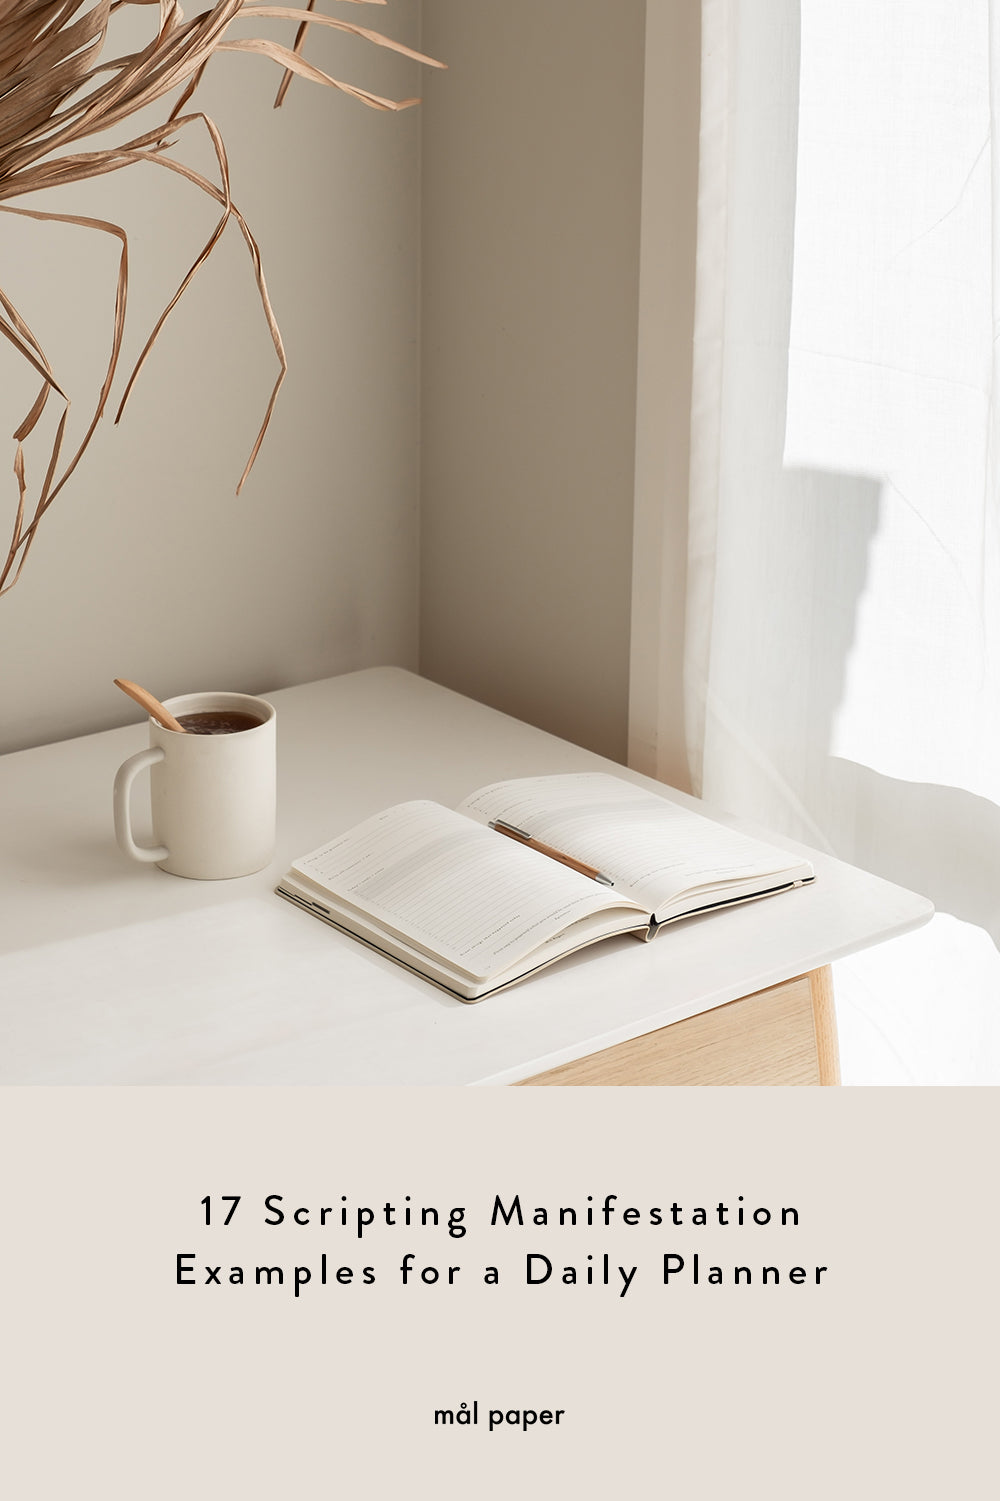 17 Scripting Manifestation Examples for a Daily Planner